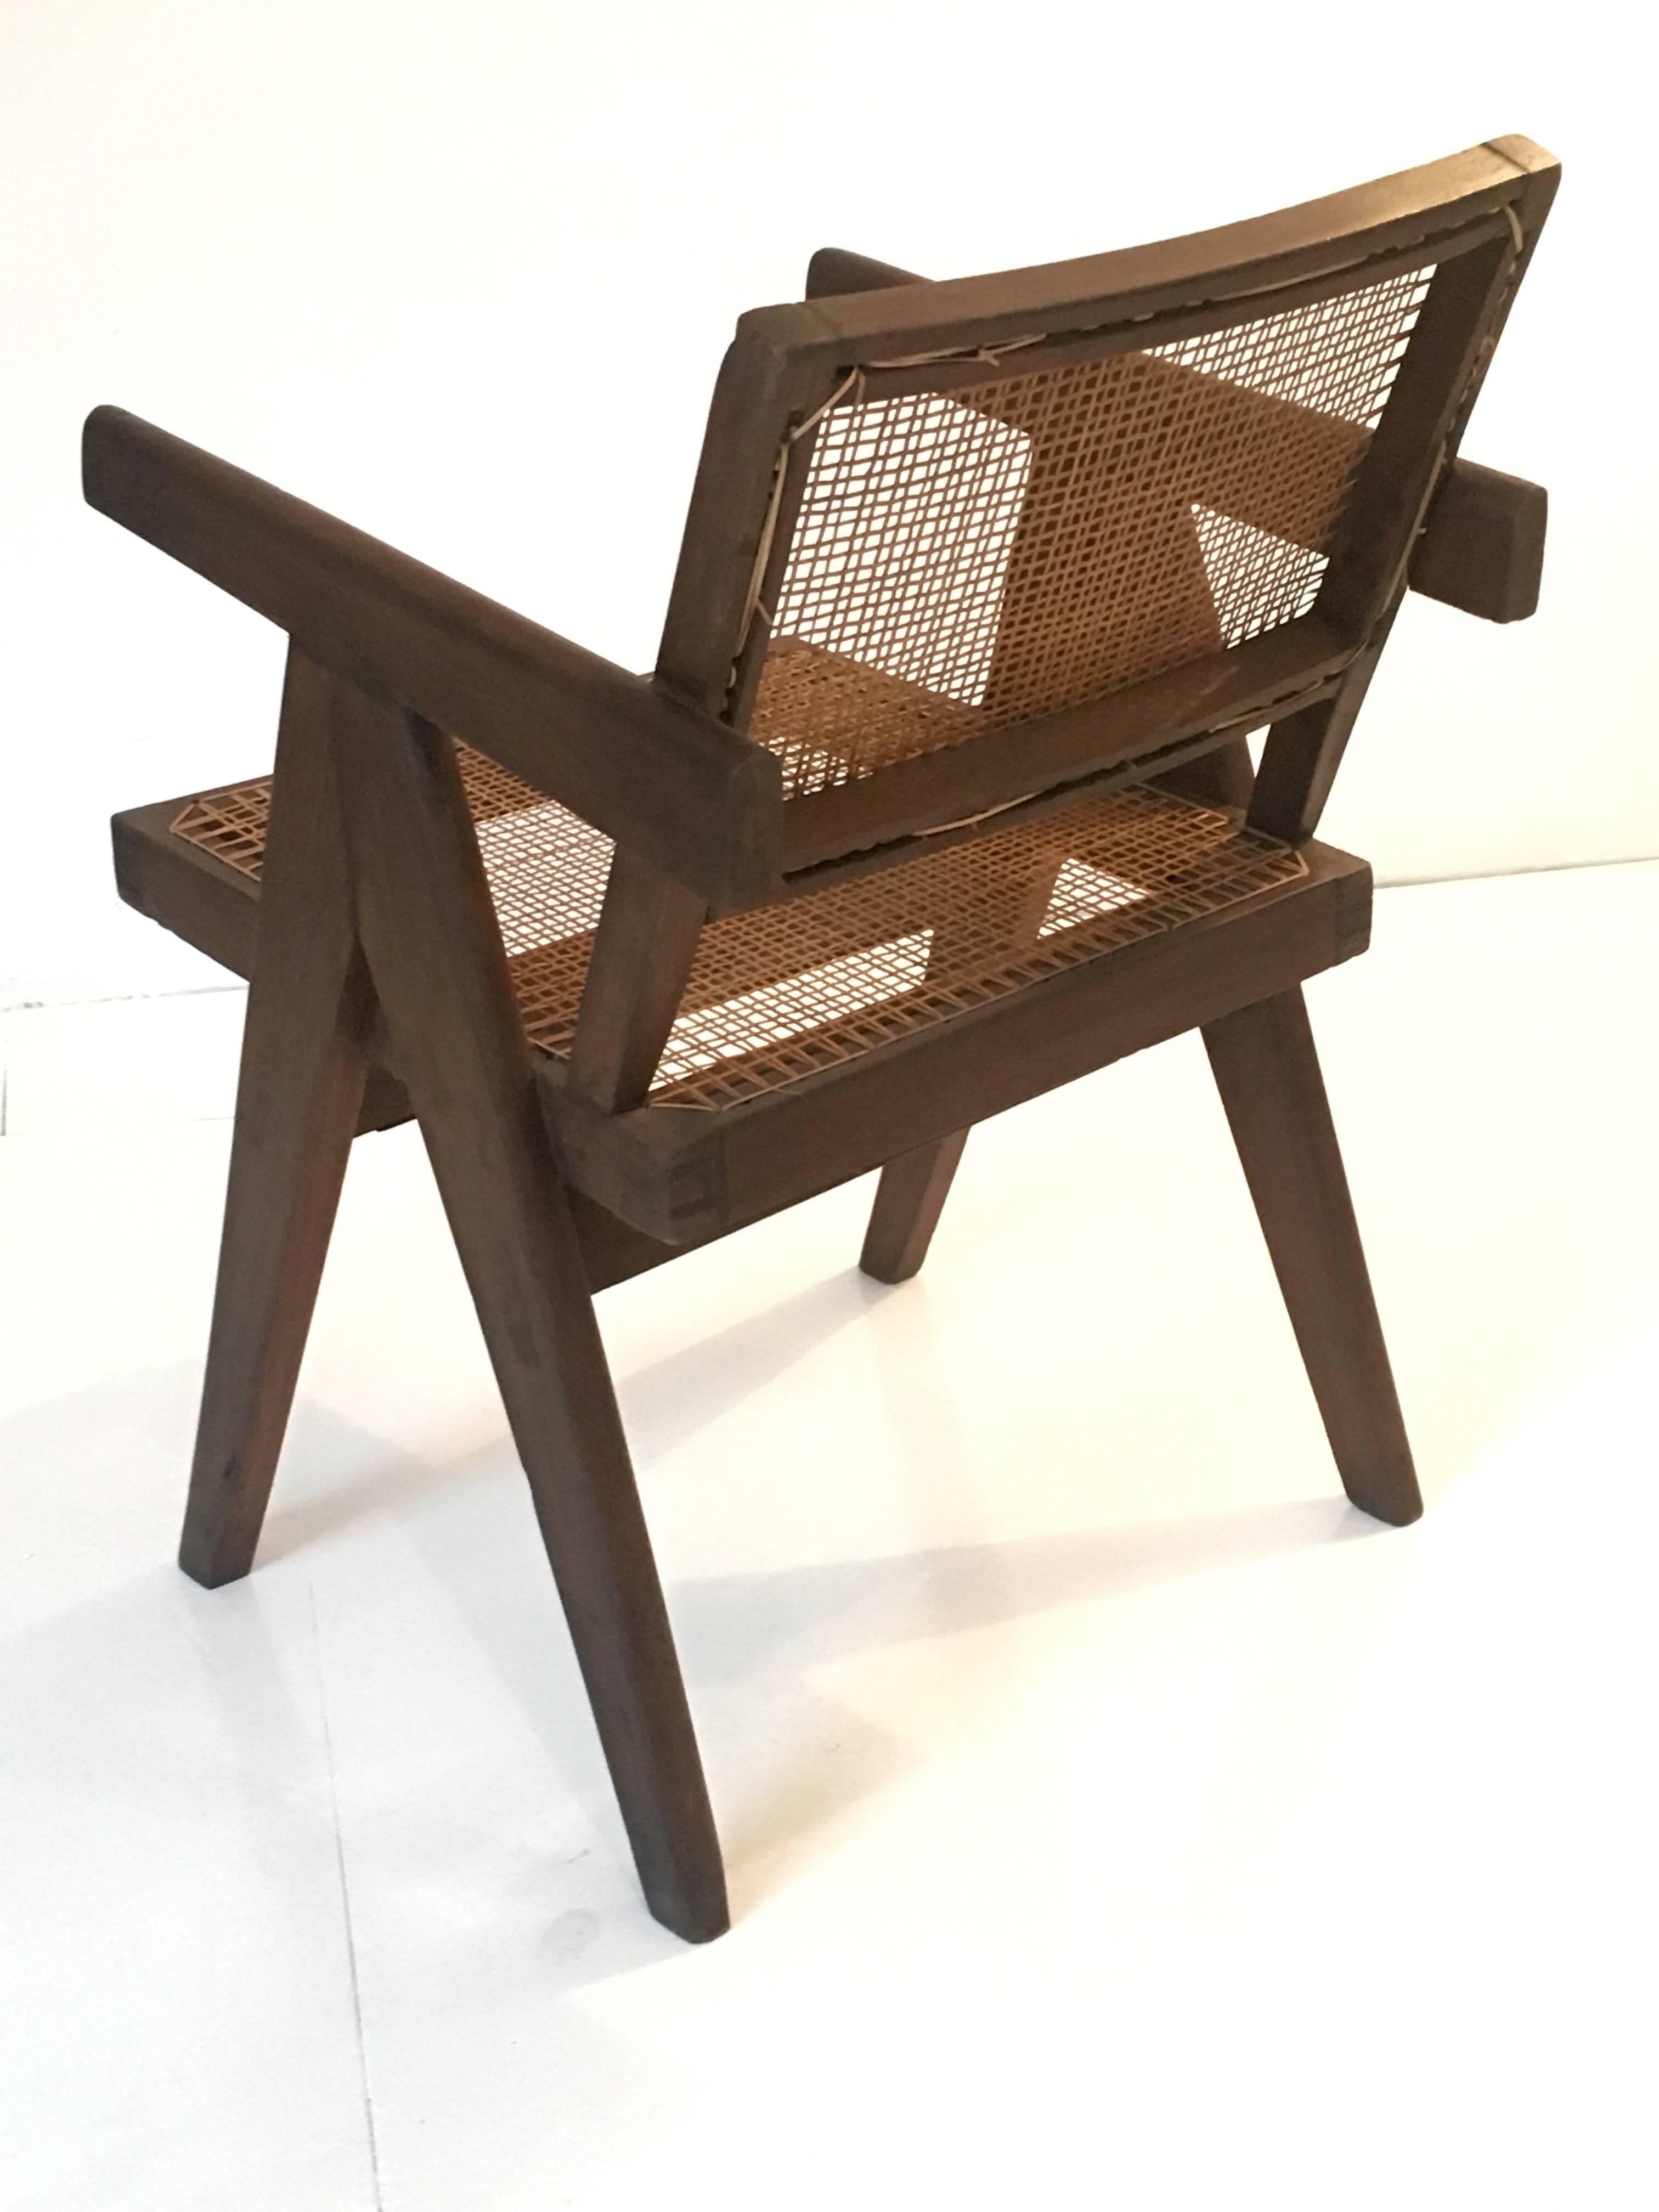 Mid-20th Century Teak Office Cane Chair Armchair by Pierre Jeanneret from Chandigarh